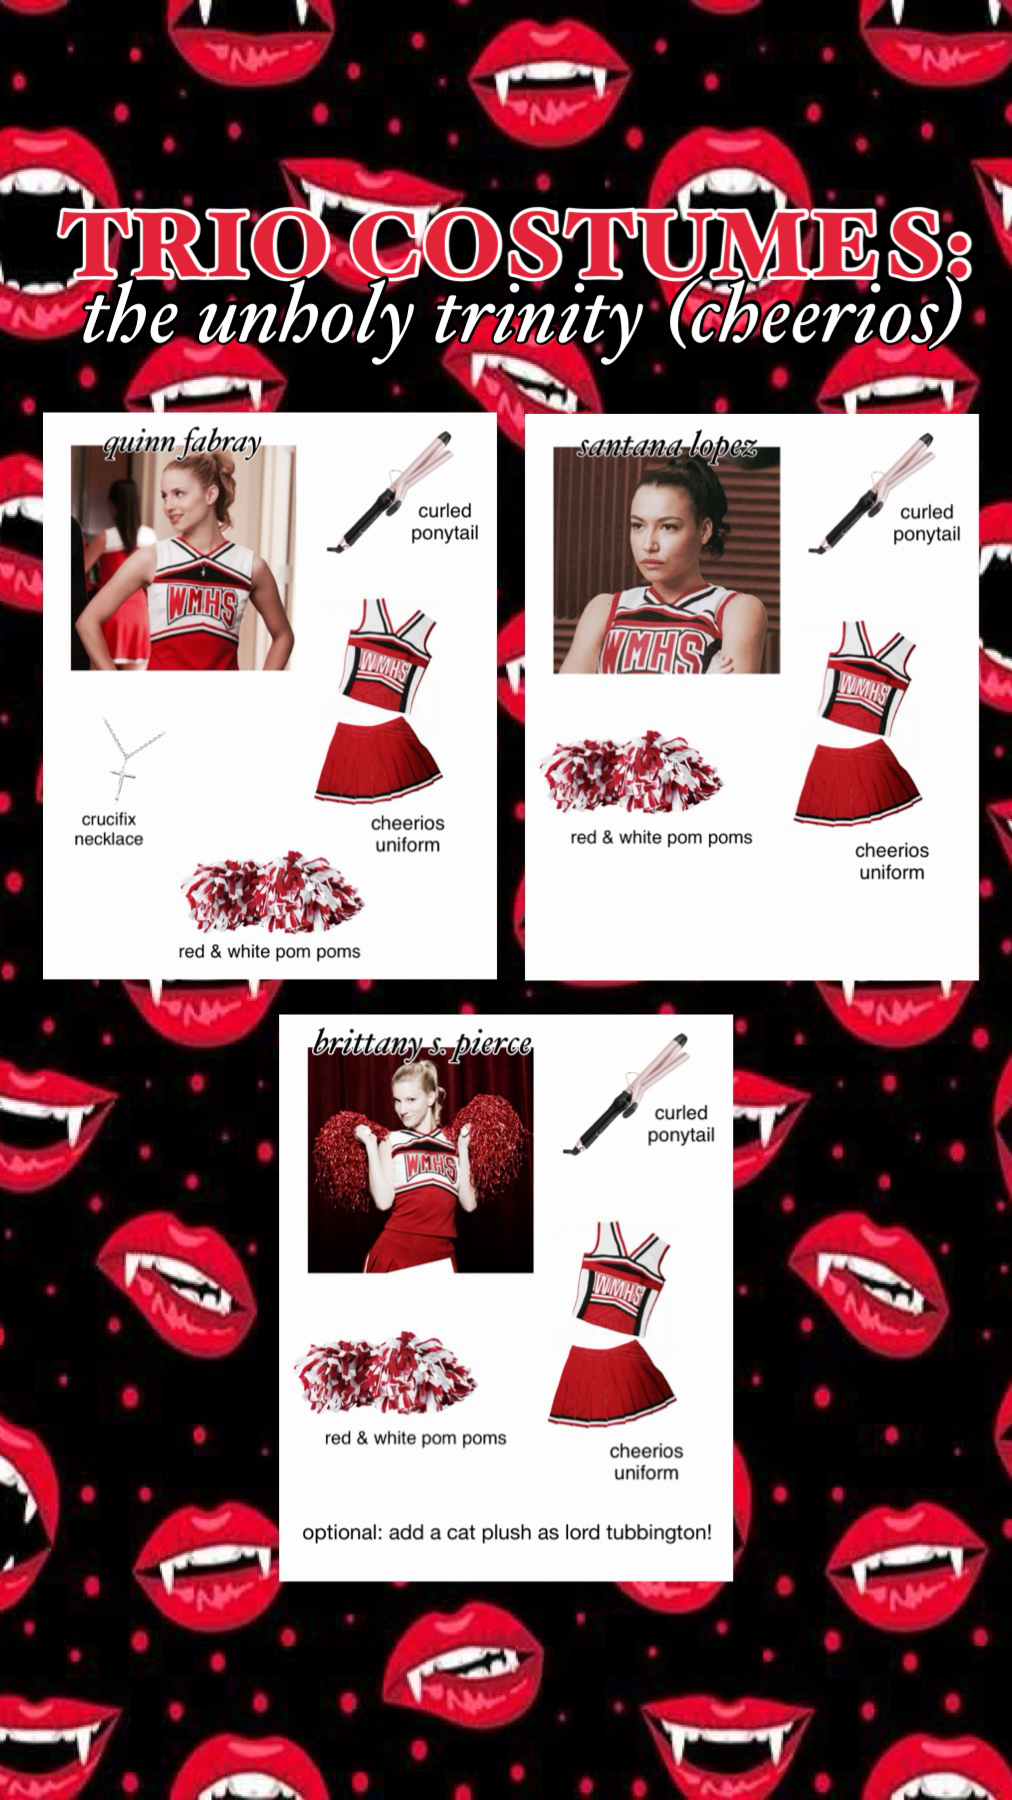 📣 THE UNHOLY TRINITY (CHEERIOS) 📣
Grab a cheerleading costume and be Quinn, Santana, and Brittany from the hit TV show Glee! As a bonus, add in your own Sue Sylvester!